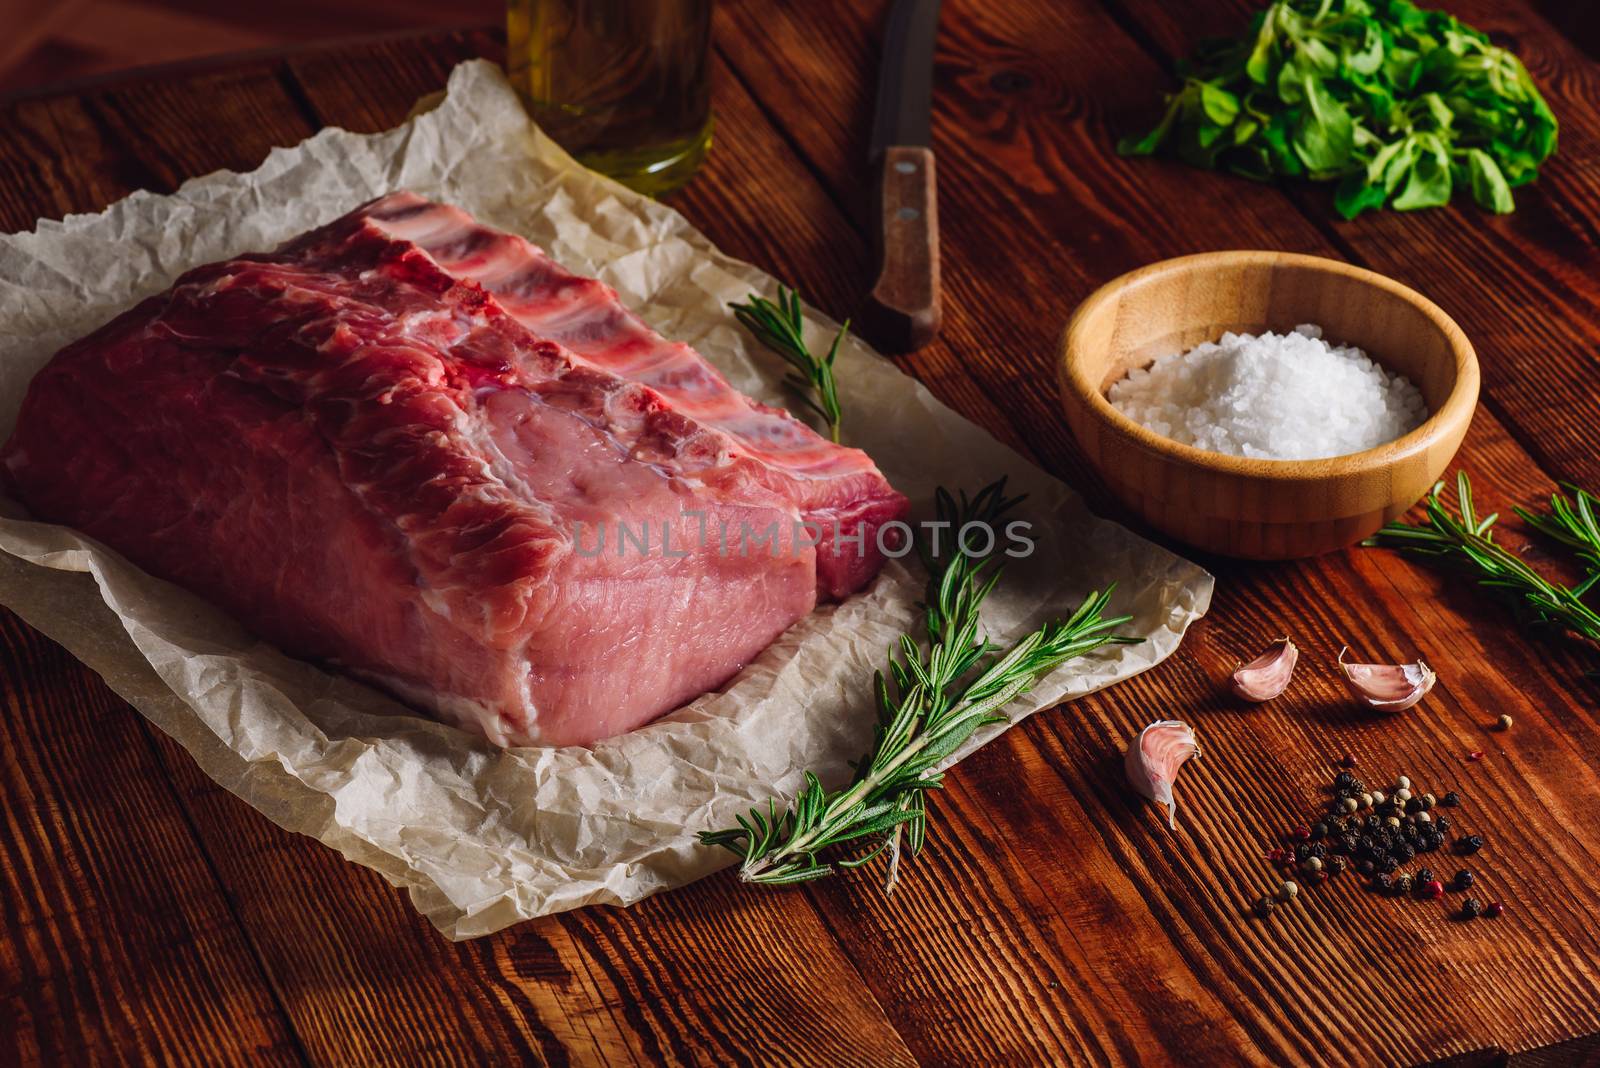 Raw Pork Ribs with Some Spices and Sprigs of Rosemary.